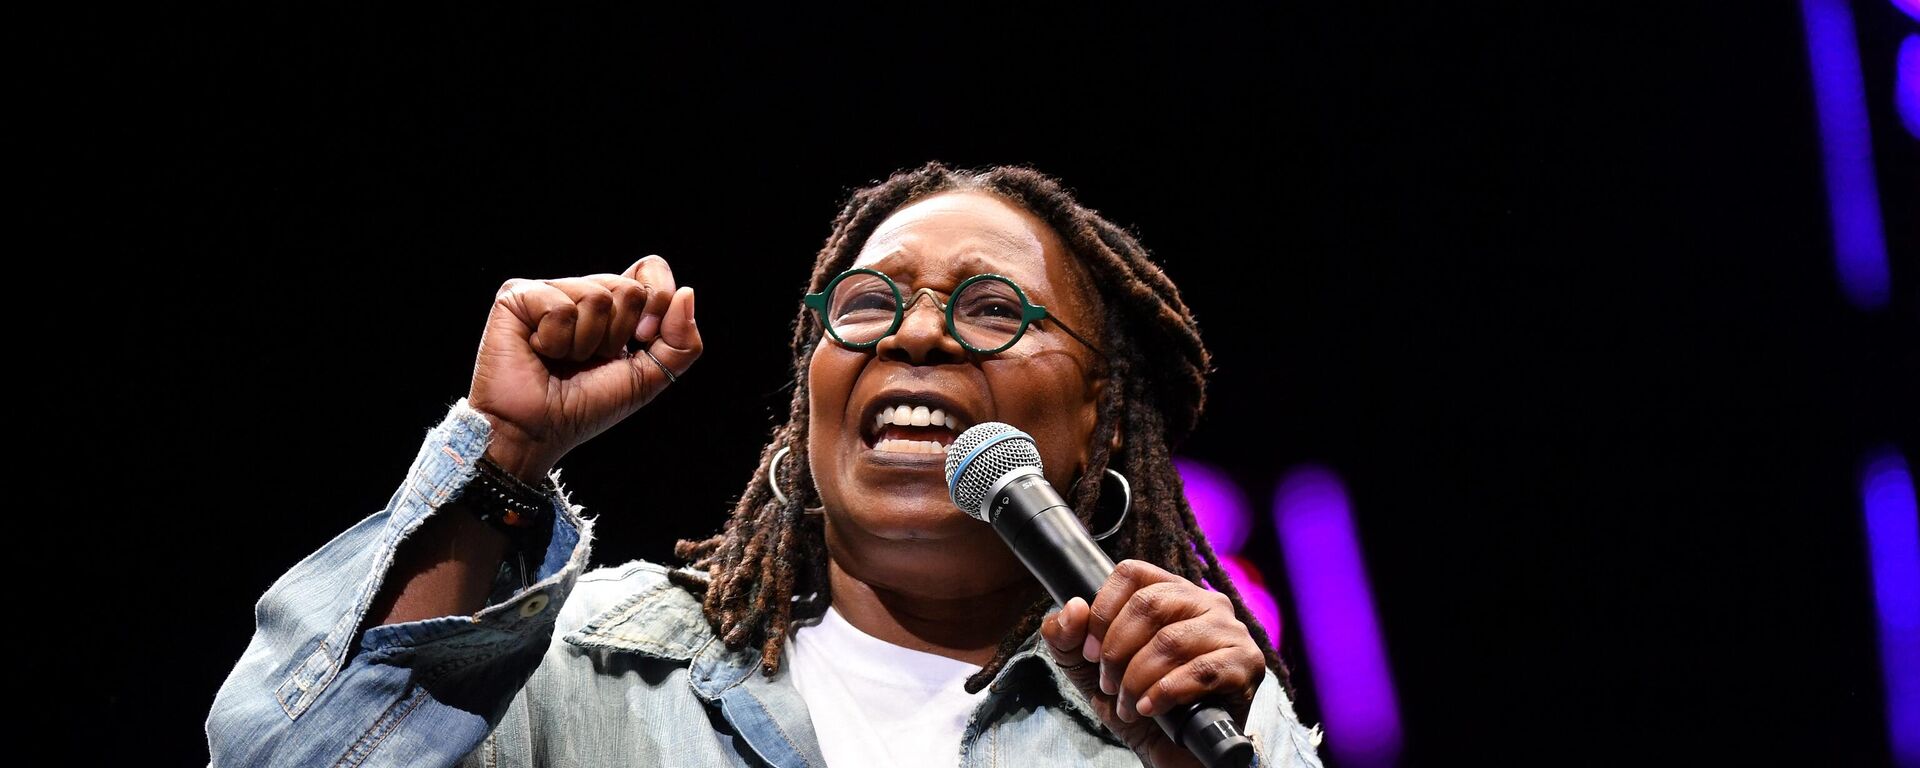  In this file photo taken on June 26, 2019, US actress Whoopi Goldberg performs onstage during the opening ceremony of WorldPride 2019 at Barclays Center in the Brooklyn borough of New York. - Sputnik International, 1920, 02.02.2022